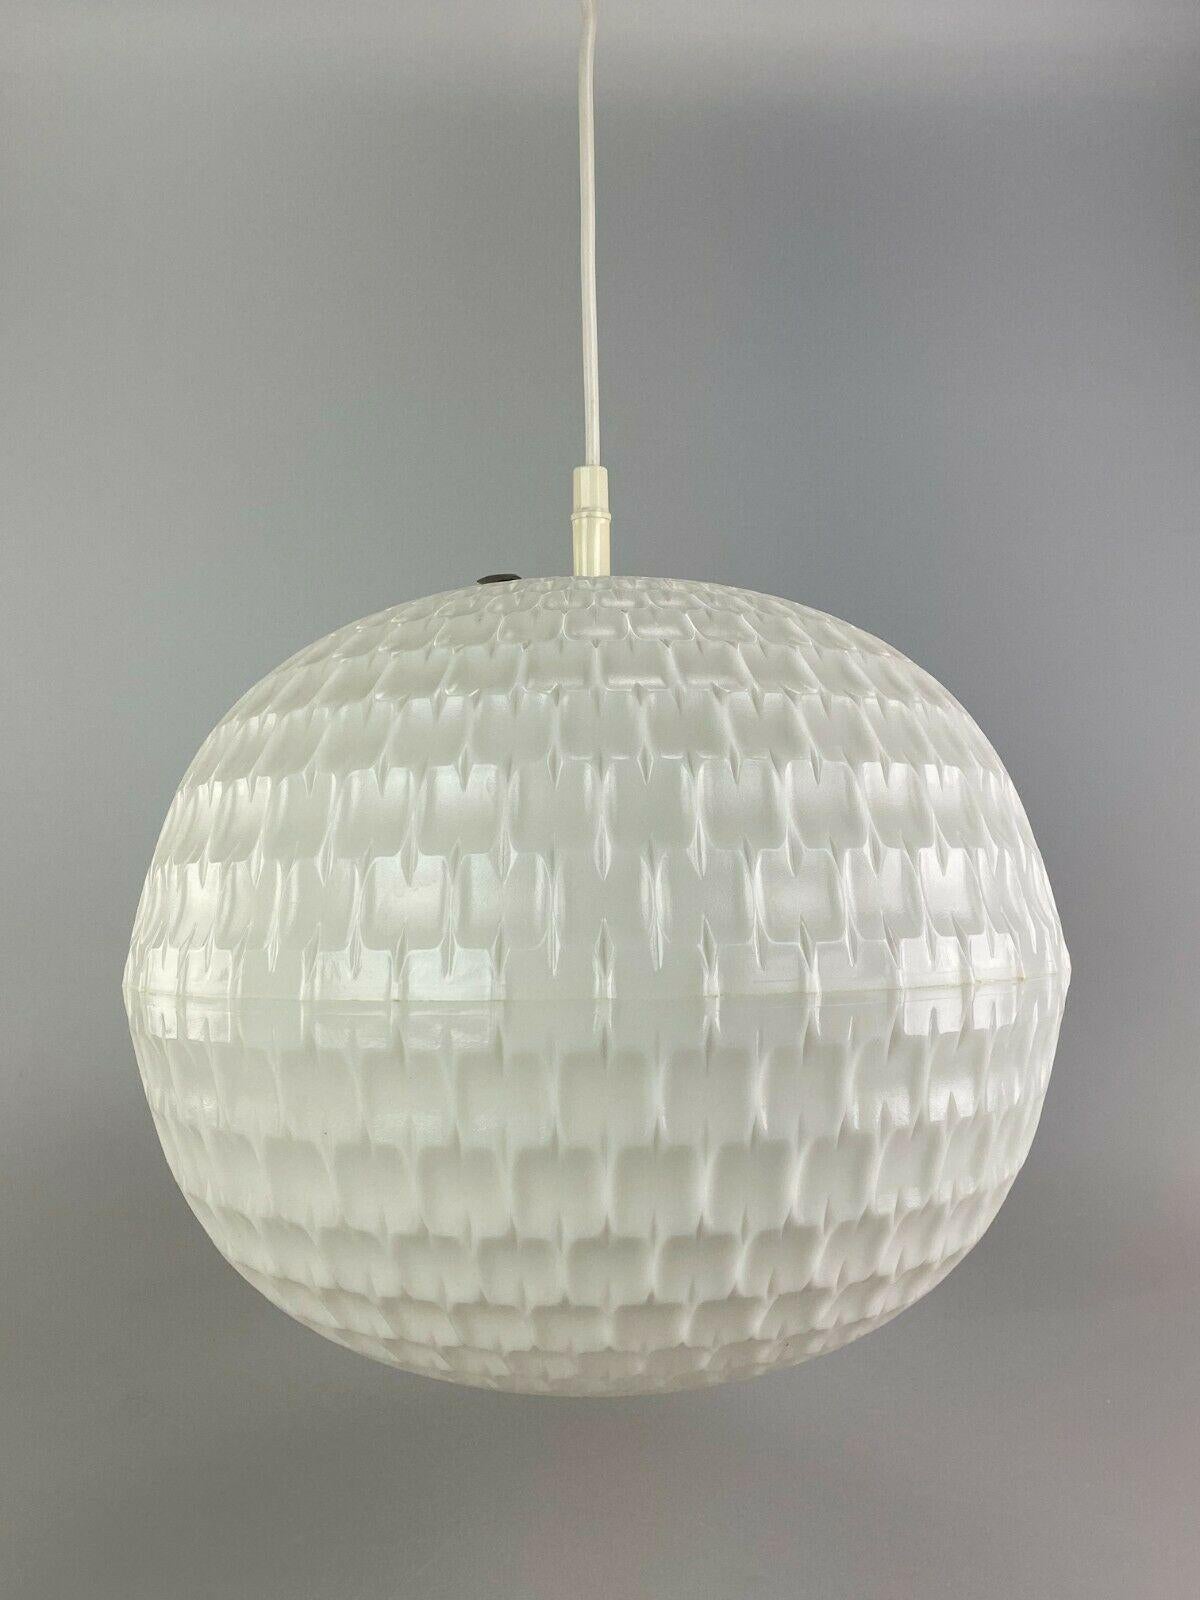 60s 70s Erco lamp light honeycomb ceiling lamp plastic space age design

Object: ceiling lamp

Manufacturer: Erco

Condition: good

Age: around 1960-1970

Dimensions:

Diameter = 34cm
Height = 34cm

Other notes:

The pictures serve